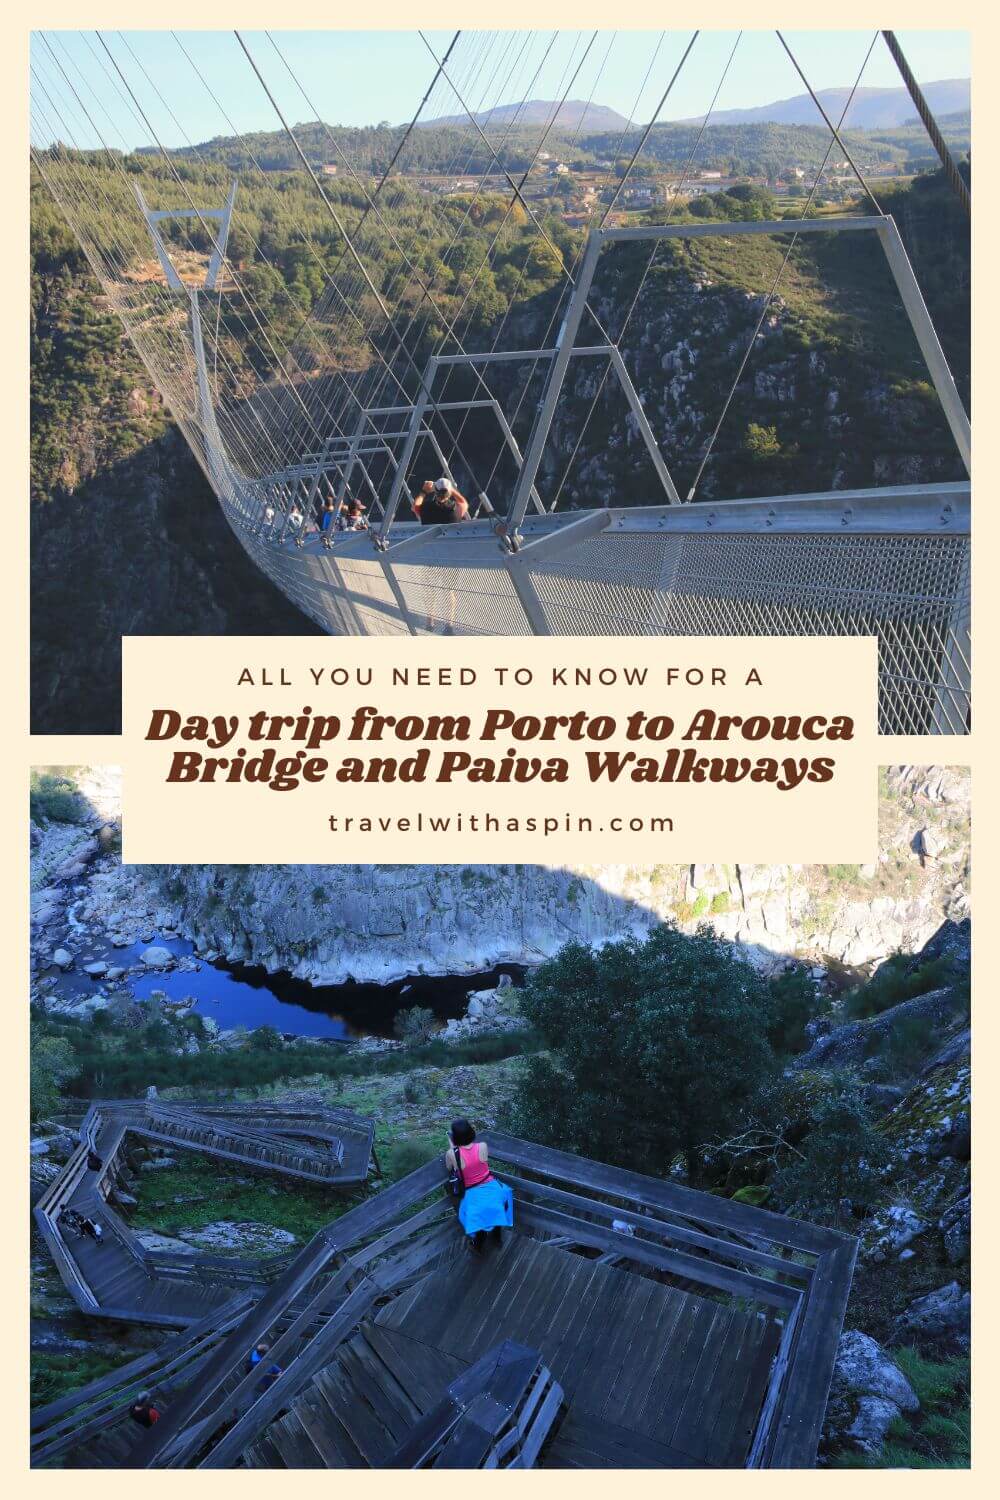 All you need to know for a perfect day trip from Porto to Arouca Bridge and Paiva Walkways